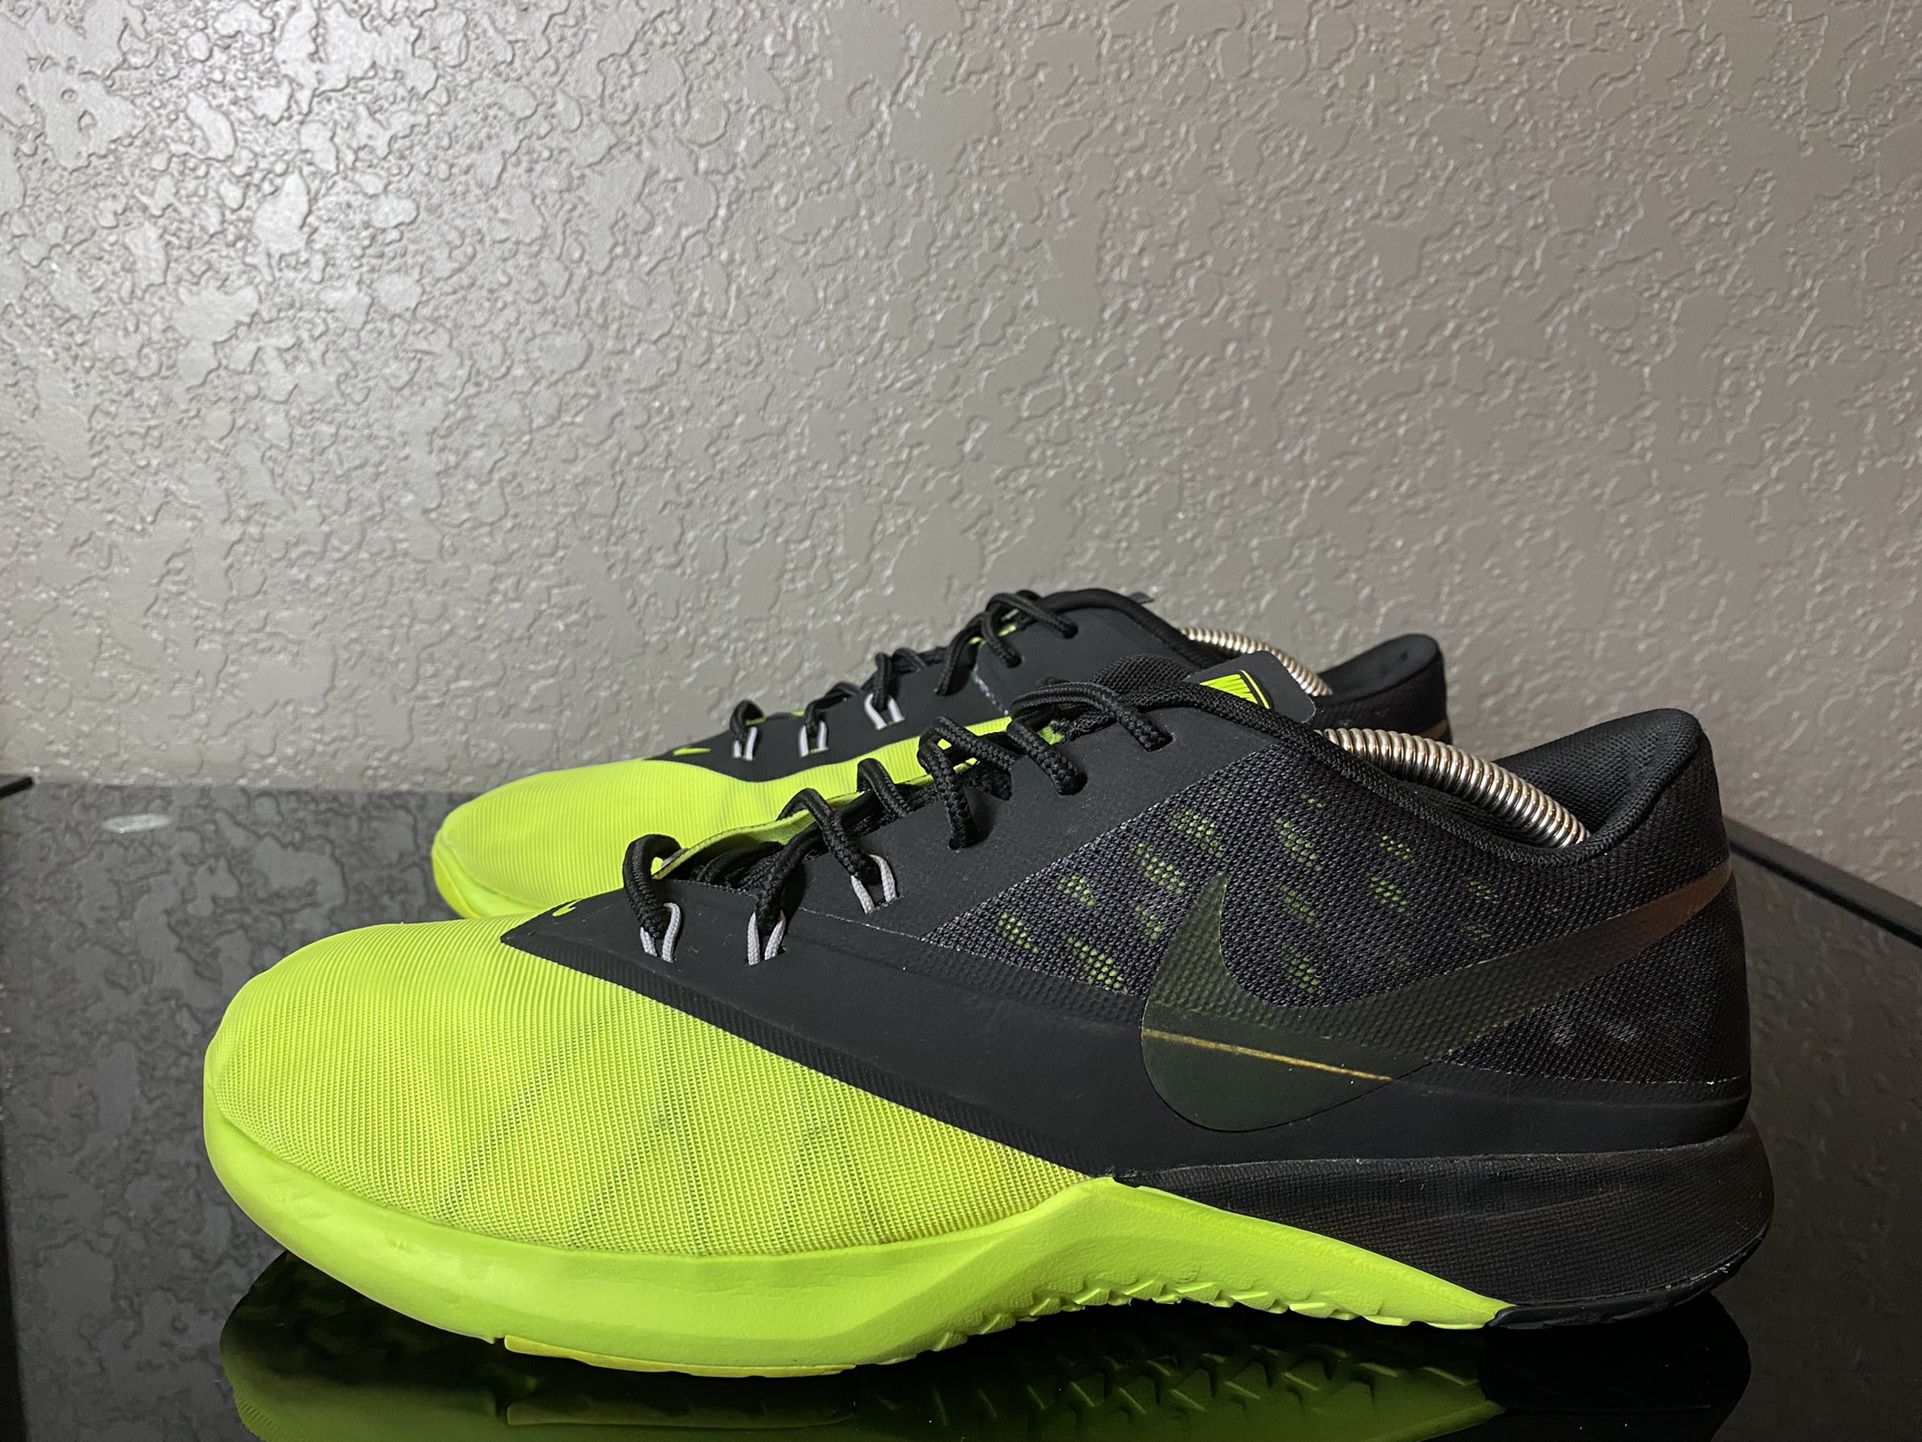 Shoes NIKE Fs Lite Trainer 4 844794 701 Mtllc Silver for Sale in Antonio, TX - OfferUp